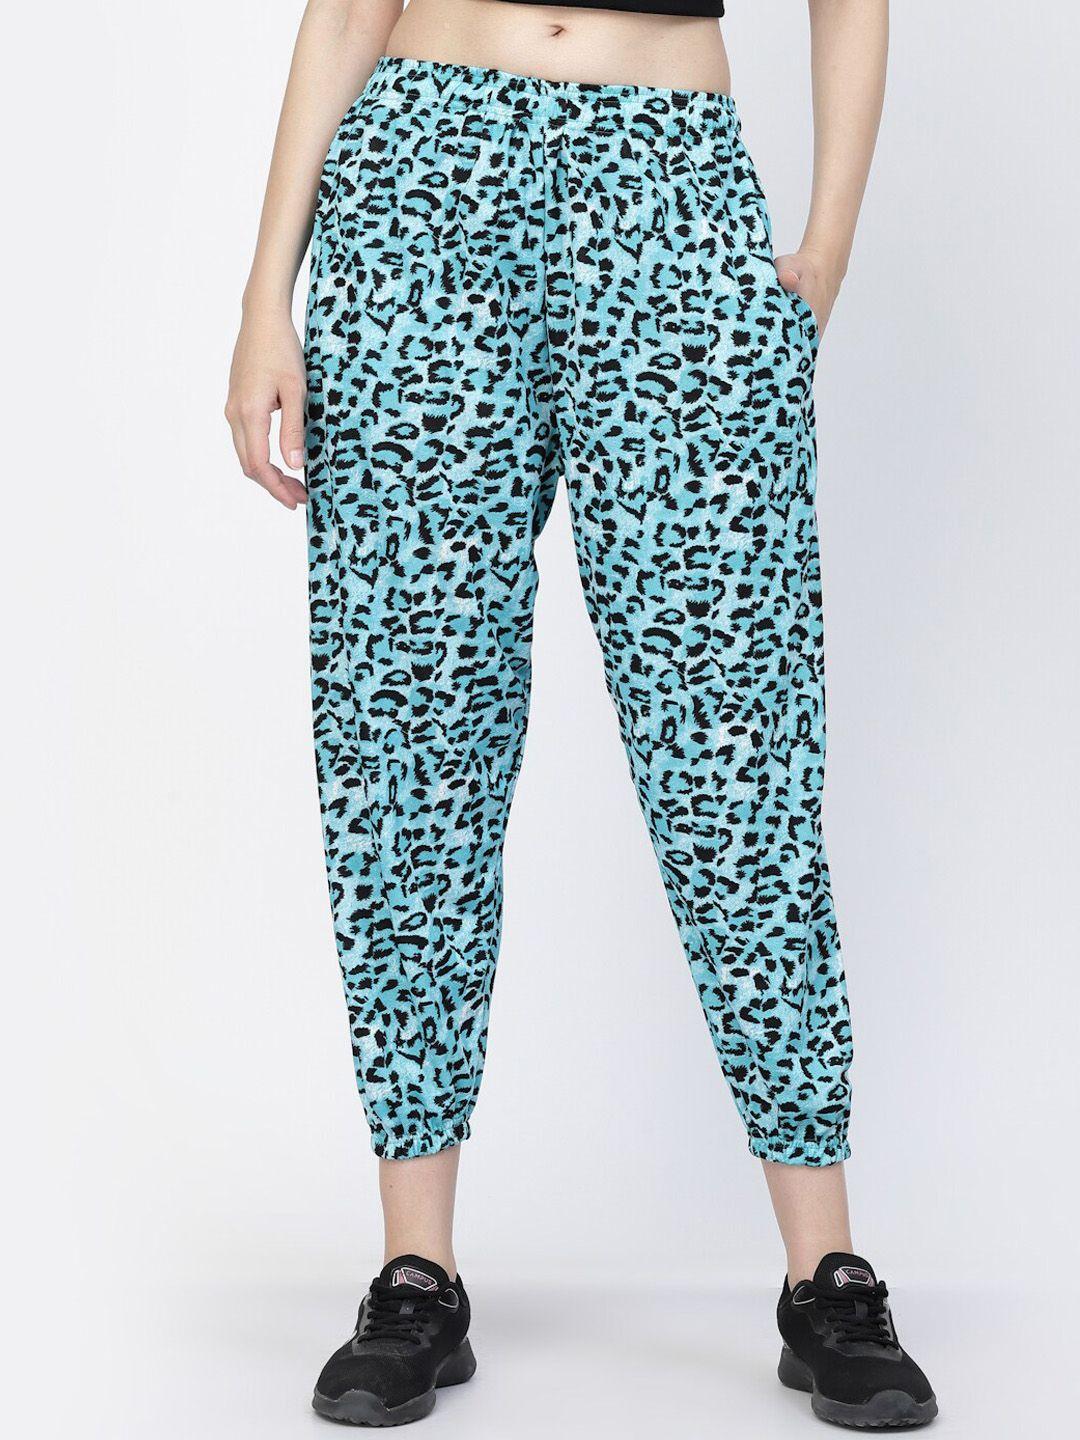 uzarus women animal printed relaxed fit joggers